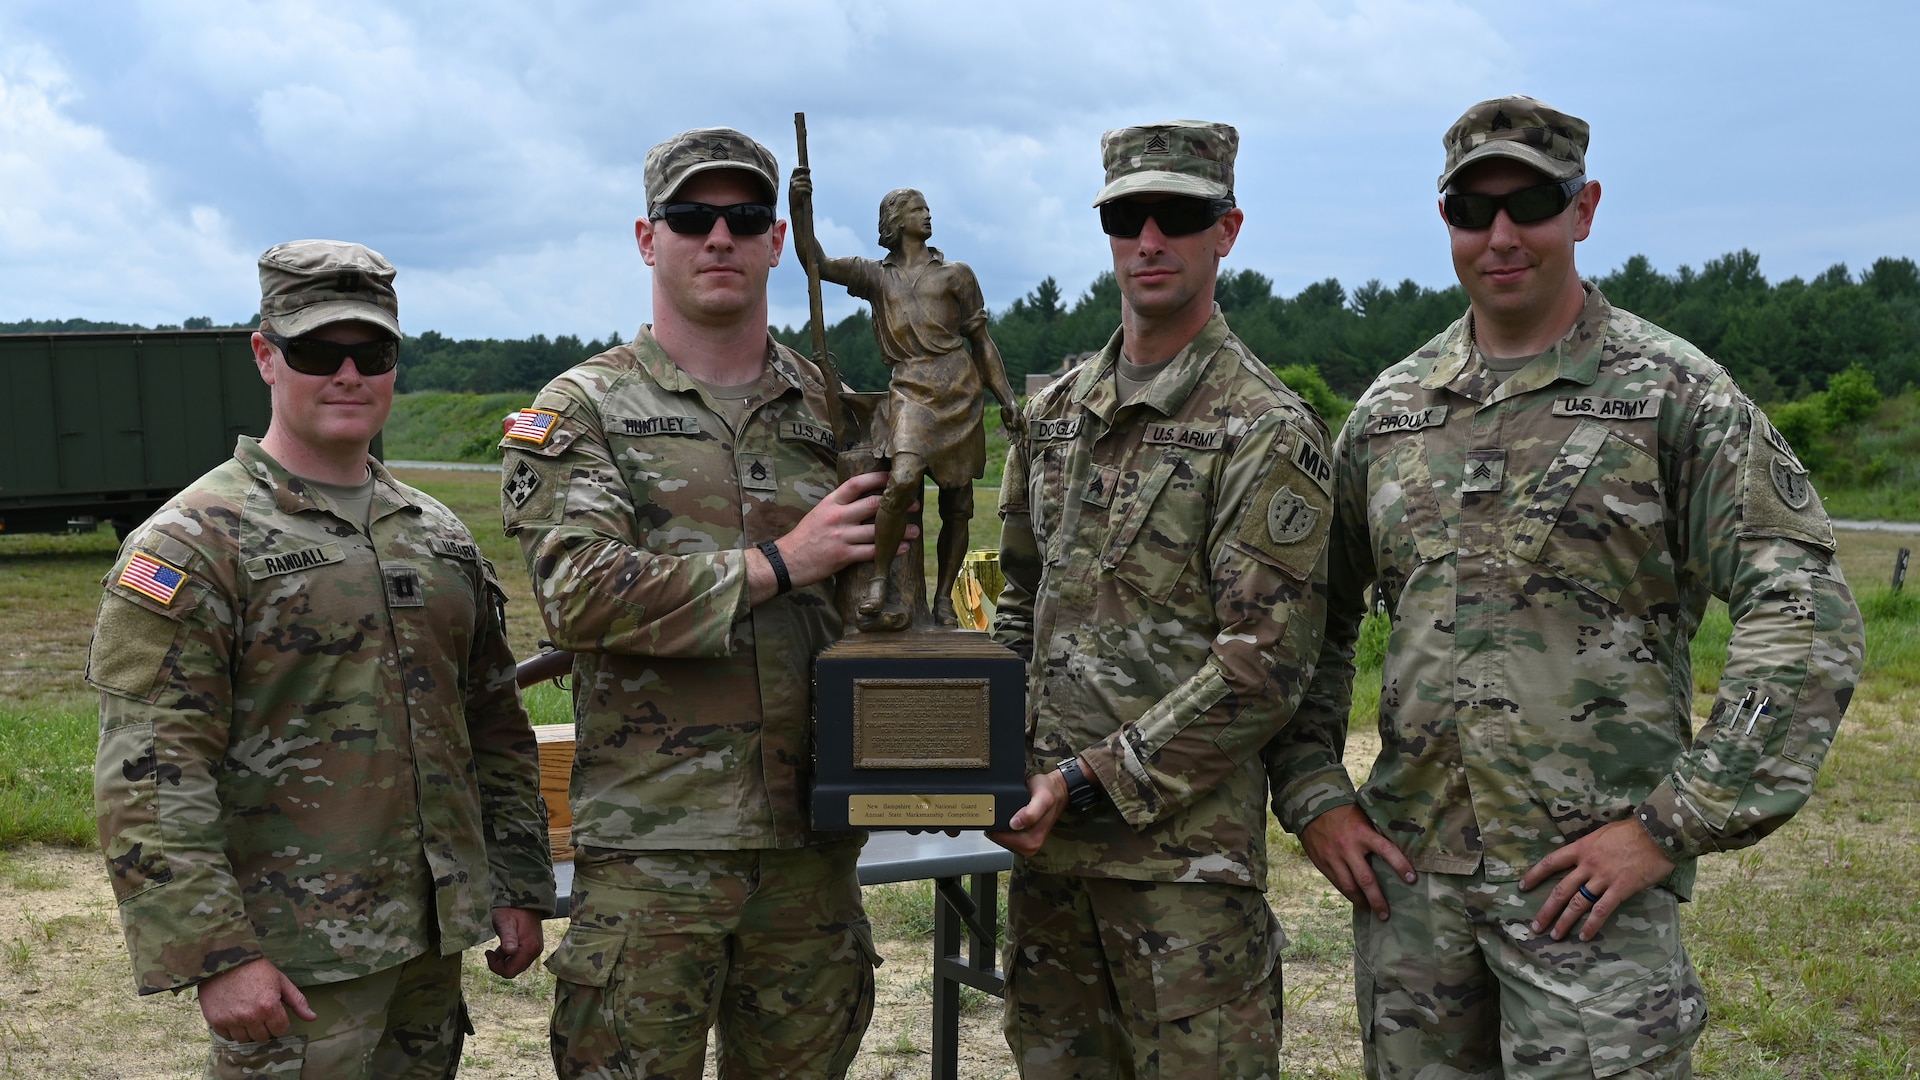 The Other Guys pose with the Remington Centennial Trophy after winning the adjutant general's annual combat marksmanship "TAG match" held July 8 - 11, 2021,at Fort Devens, Mass.